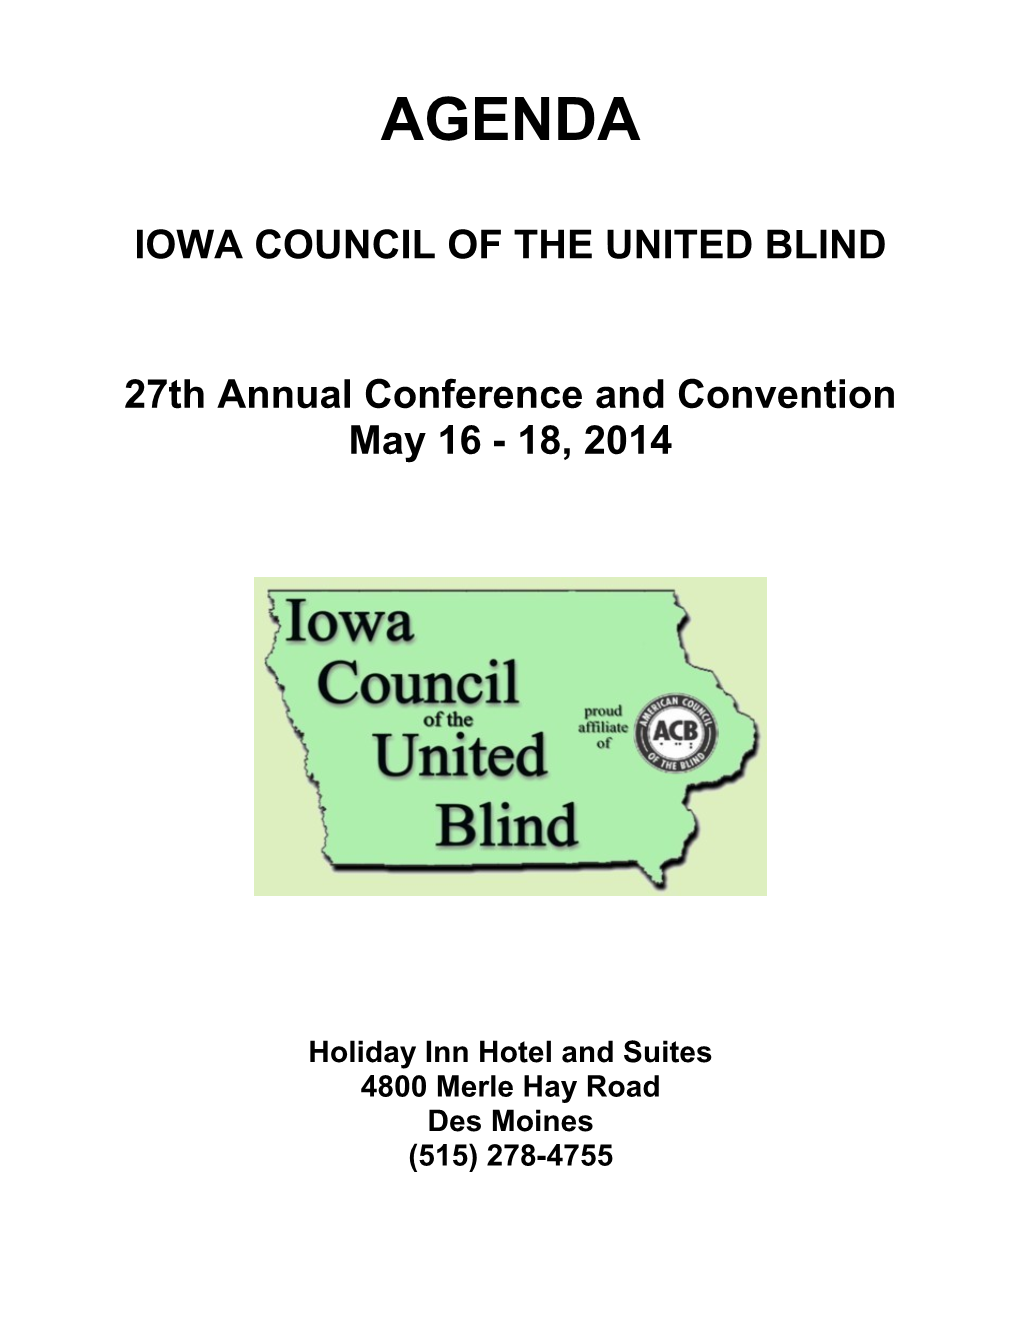 Iowa Council of the United Blind